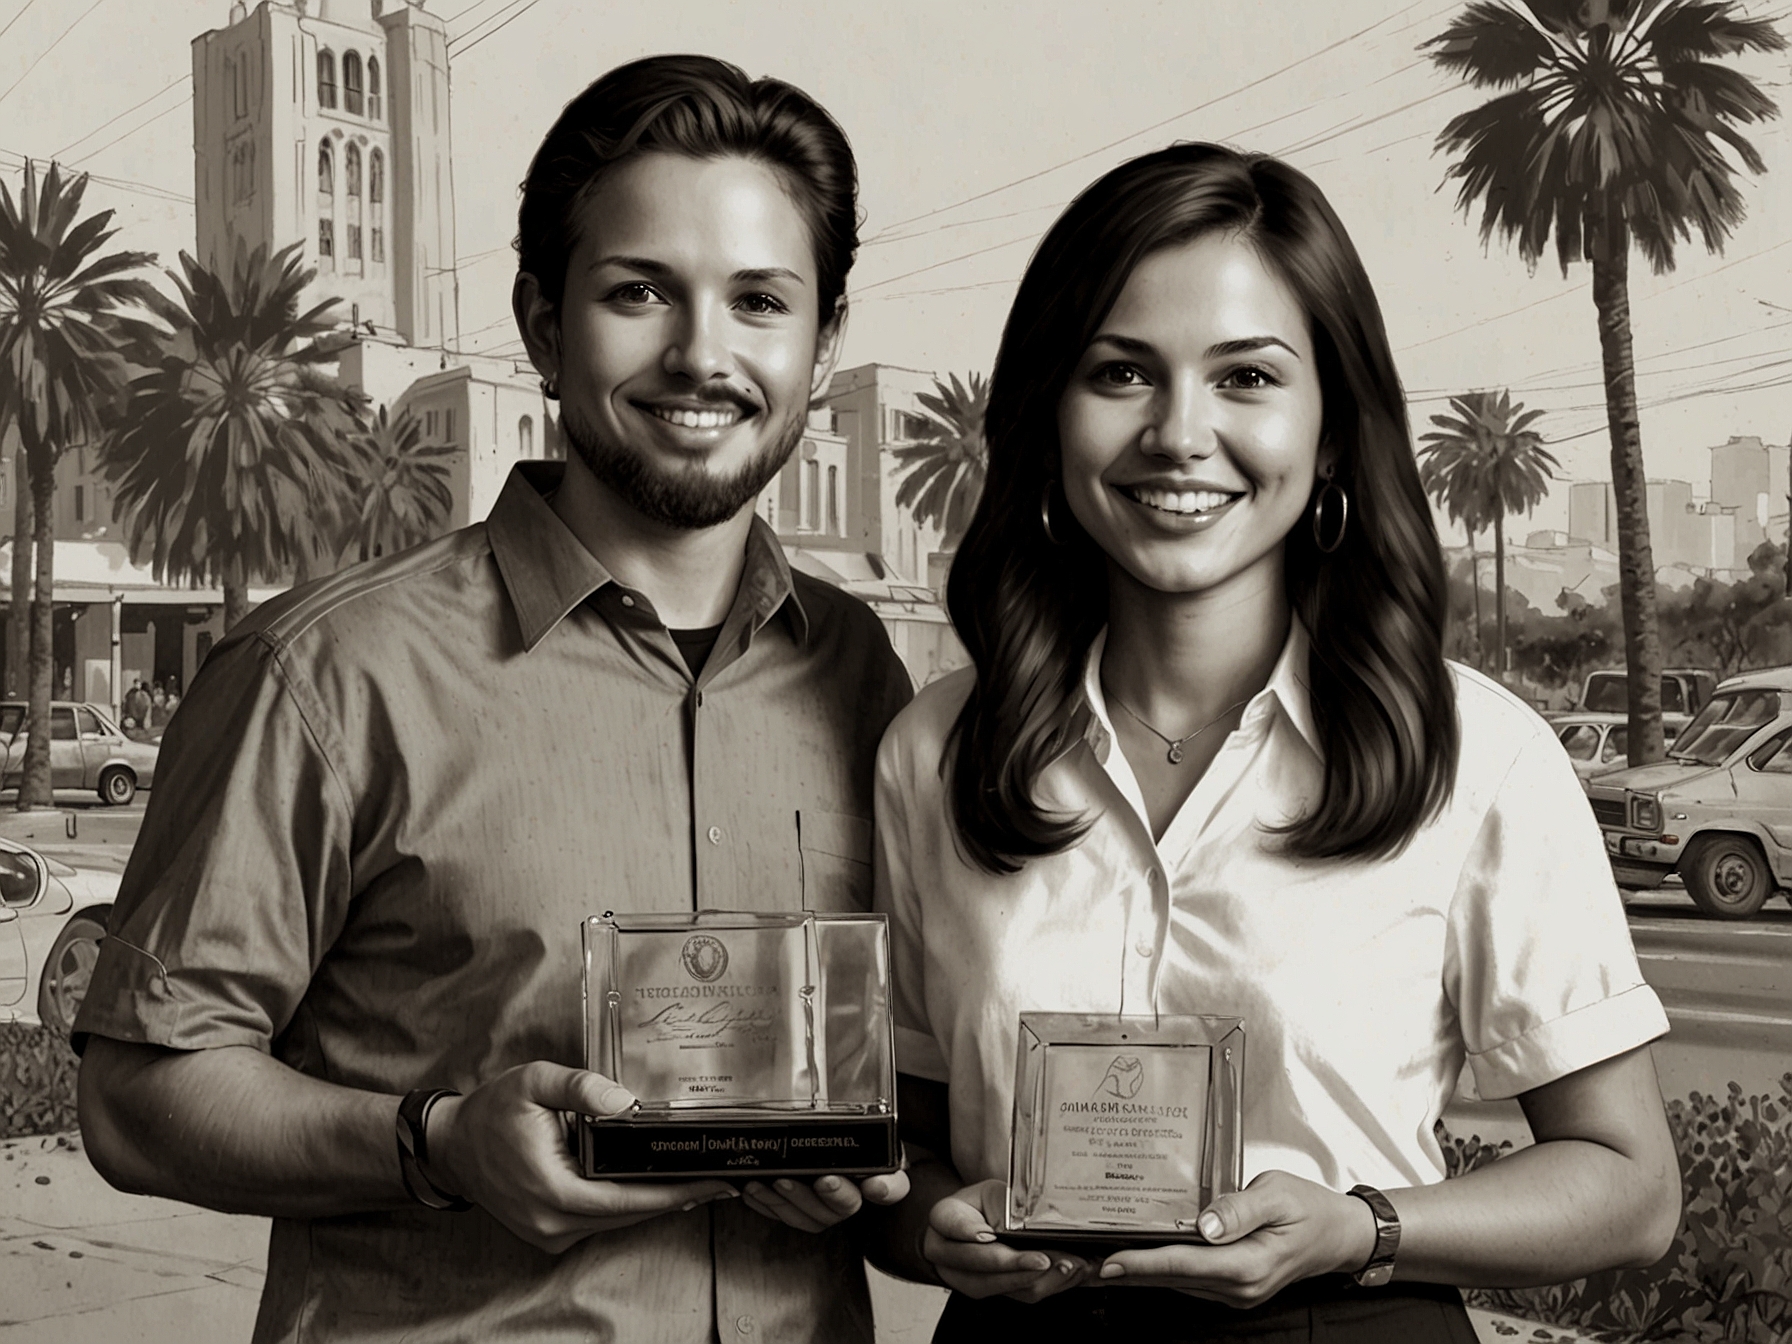 Veronica Flores and Vincent Perella proudly hold their Southern California Journalism Award, symbolizing their groundbreaking work in utilizing social media to enhance IndieWire's digital journalism efforts.